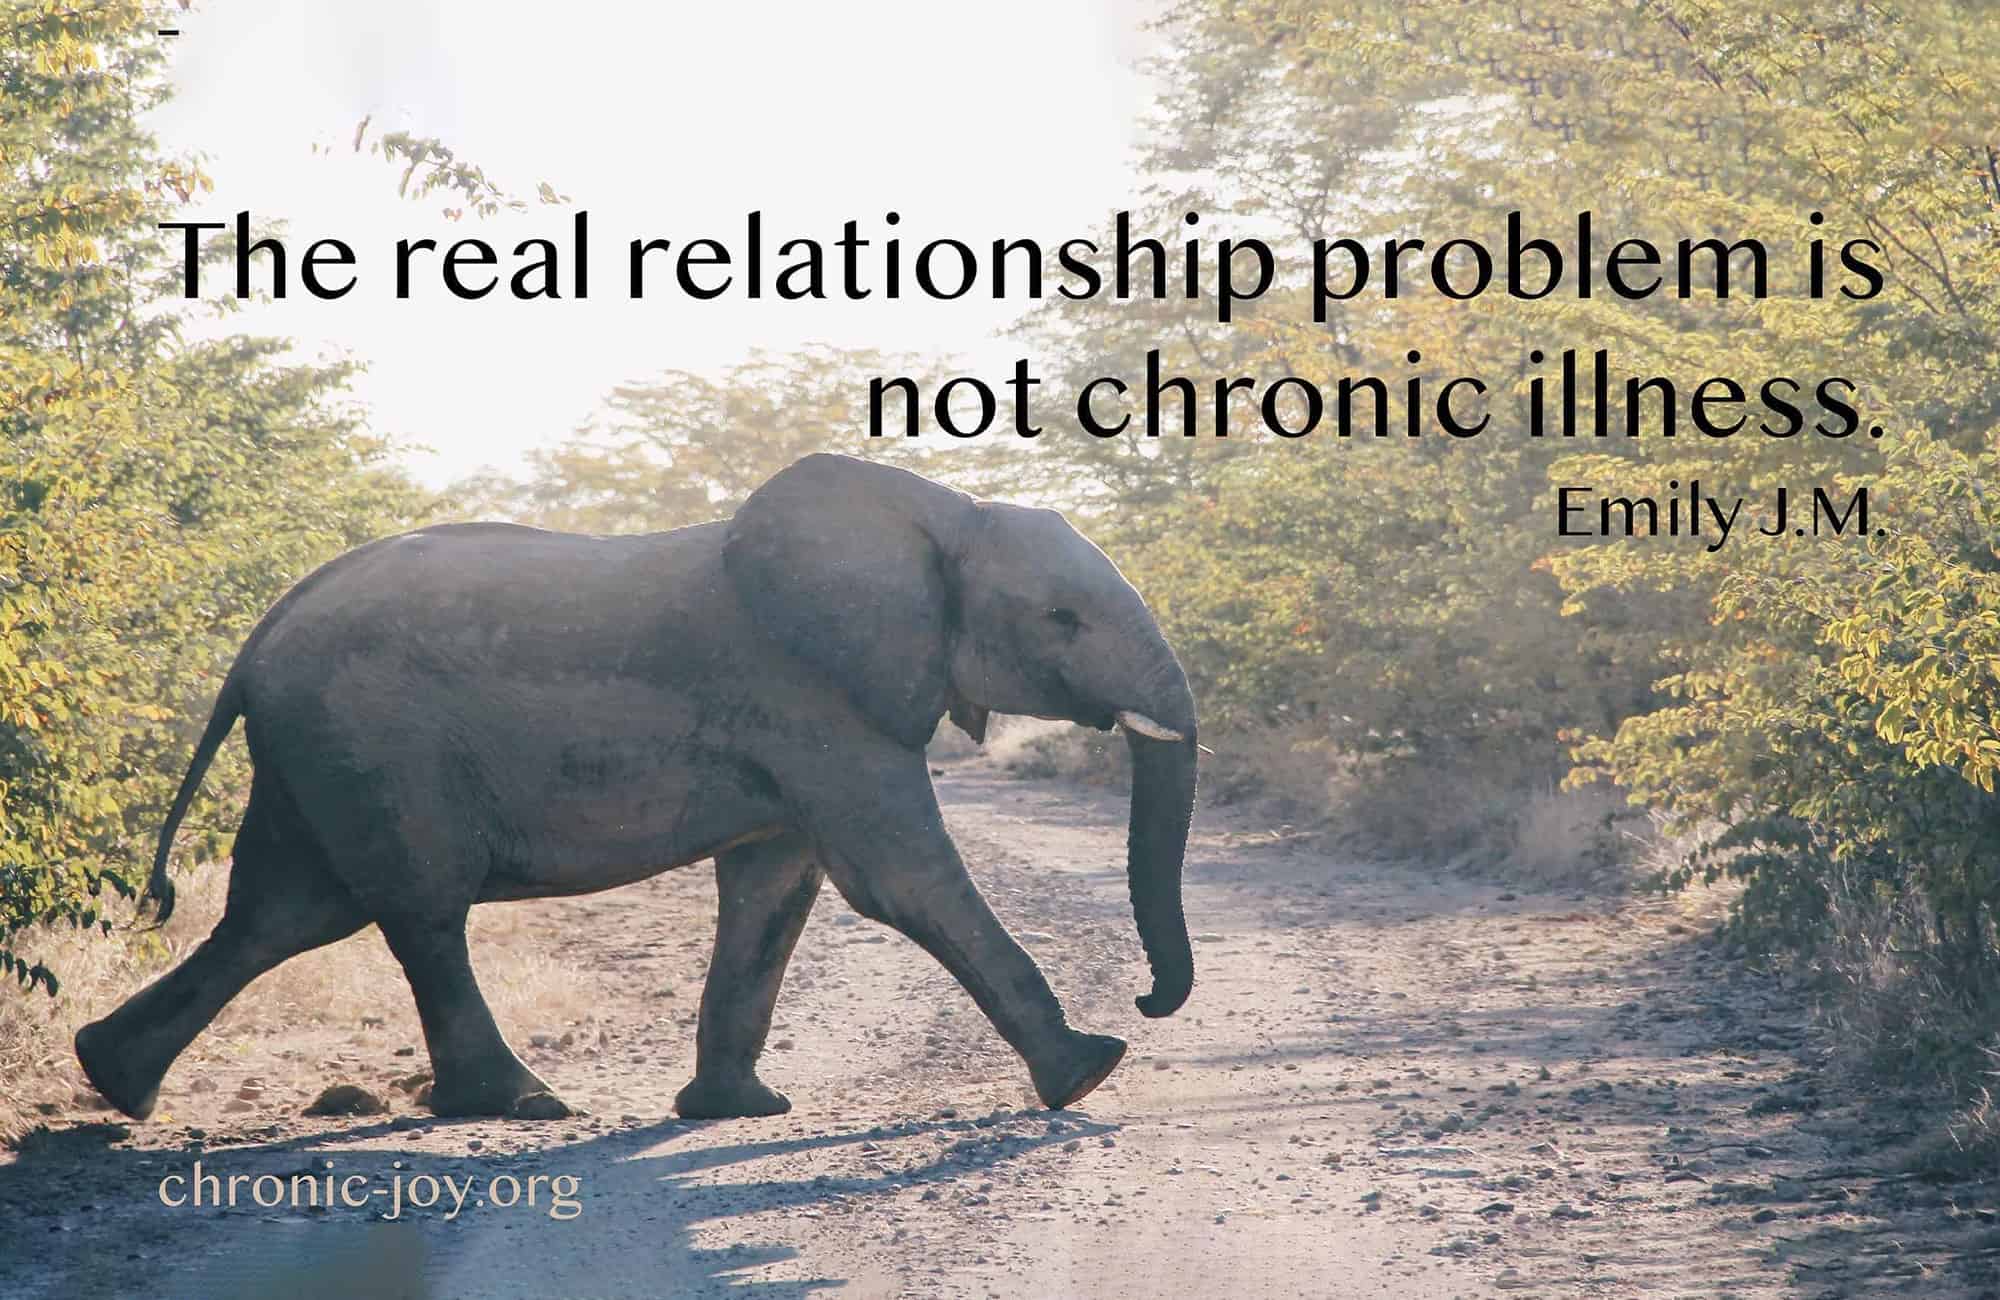 "The real relationship problem is not chronic illness." Emily J.M.